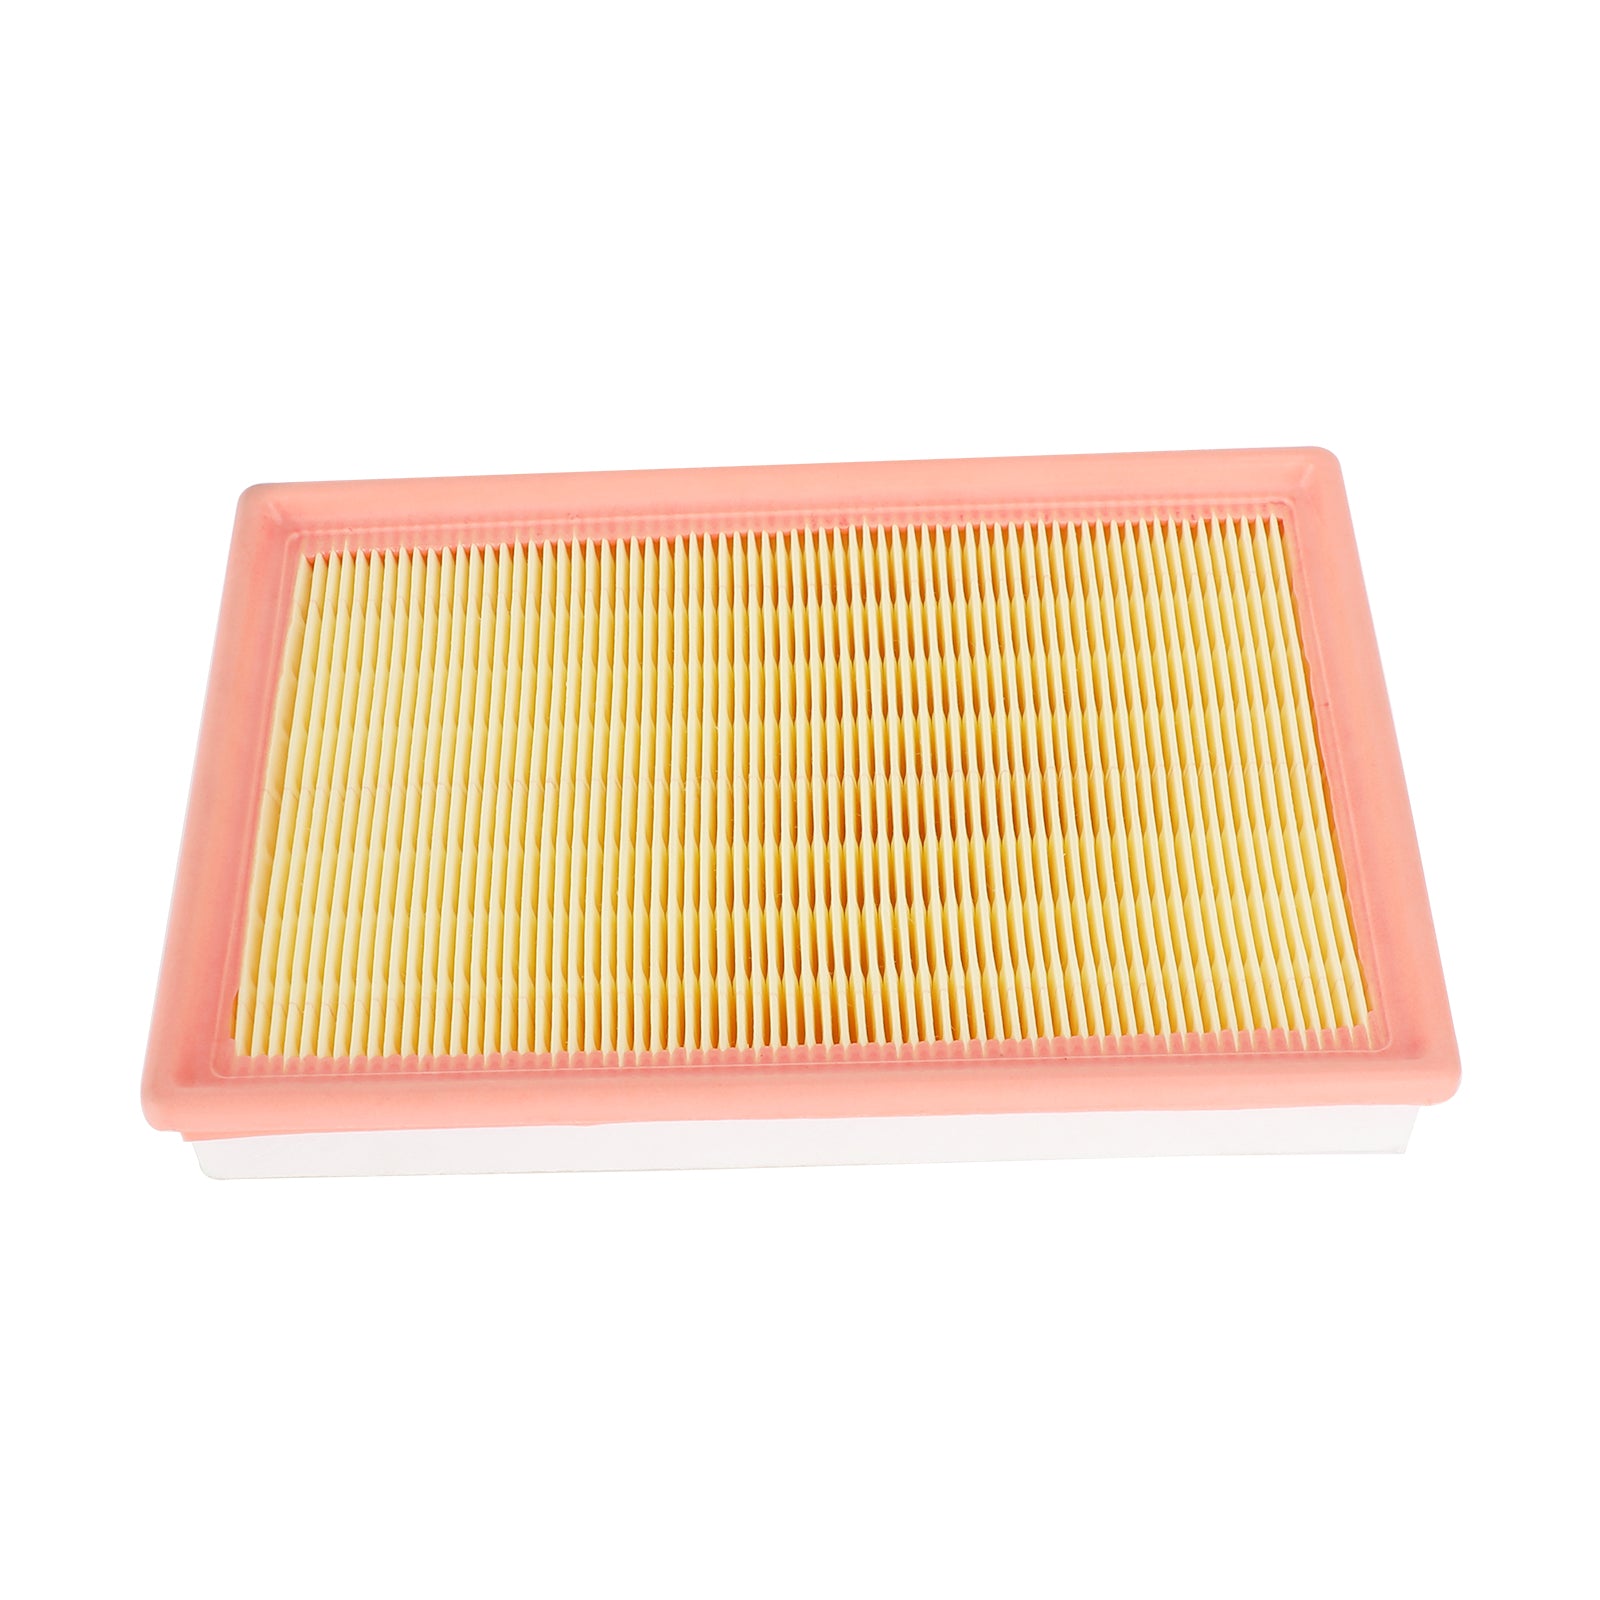 Air Filter For BMW HP4 1000 S 1000 R S1000 RR S 1000 XR 2009-2020 13717717842 Generic